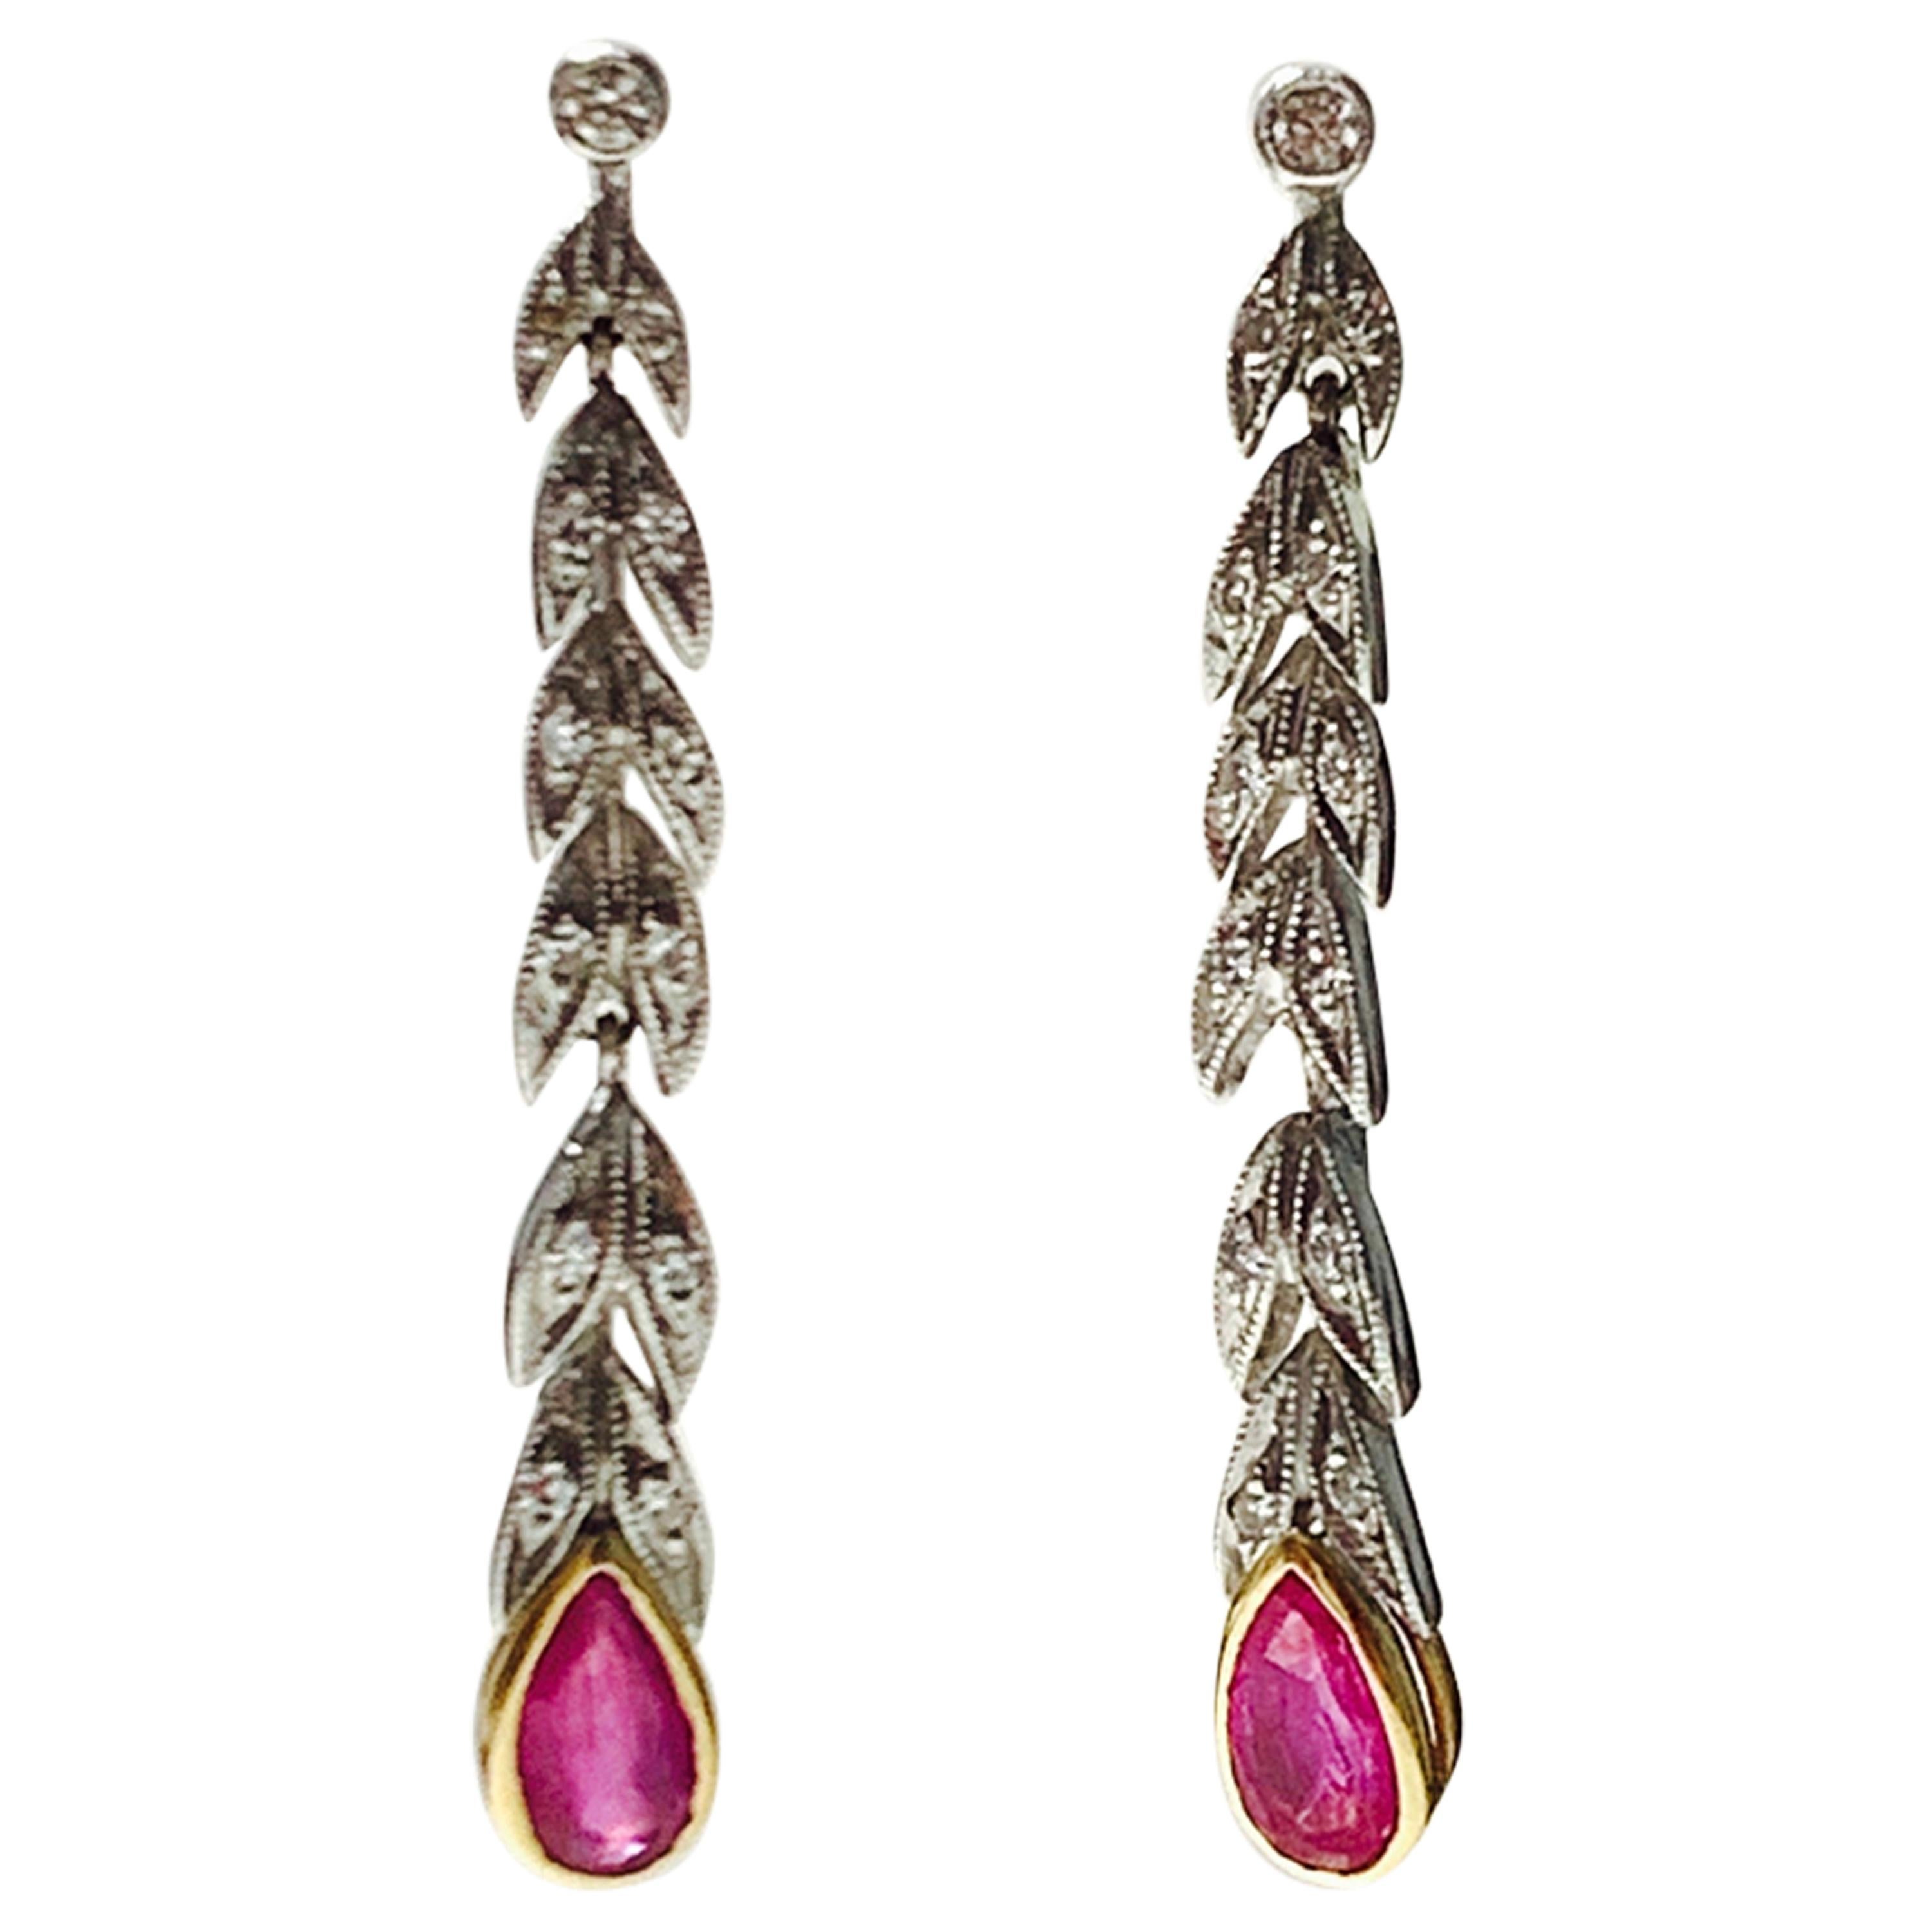 Ruby and Diamond Drop Earrings in Platinum and 18 Karat White Gold